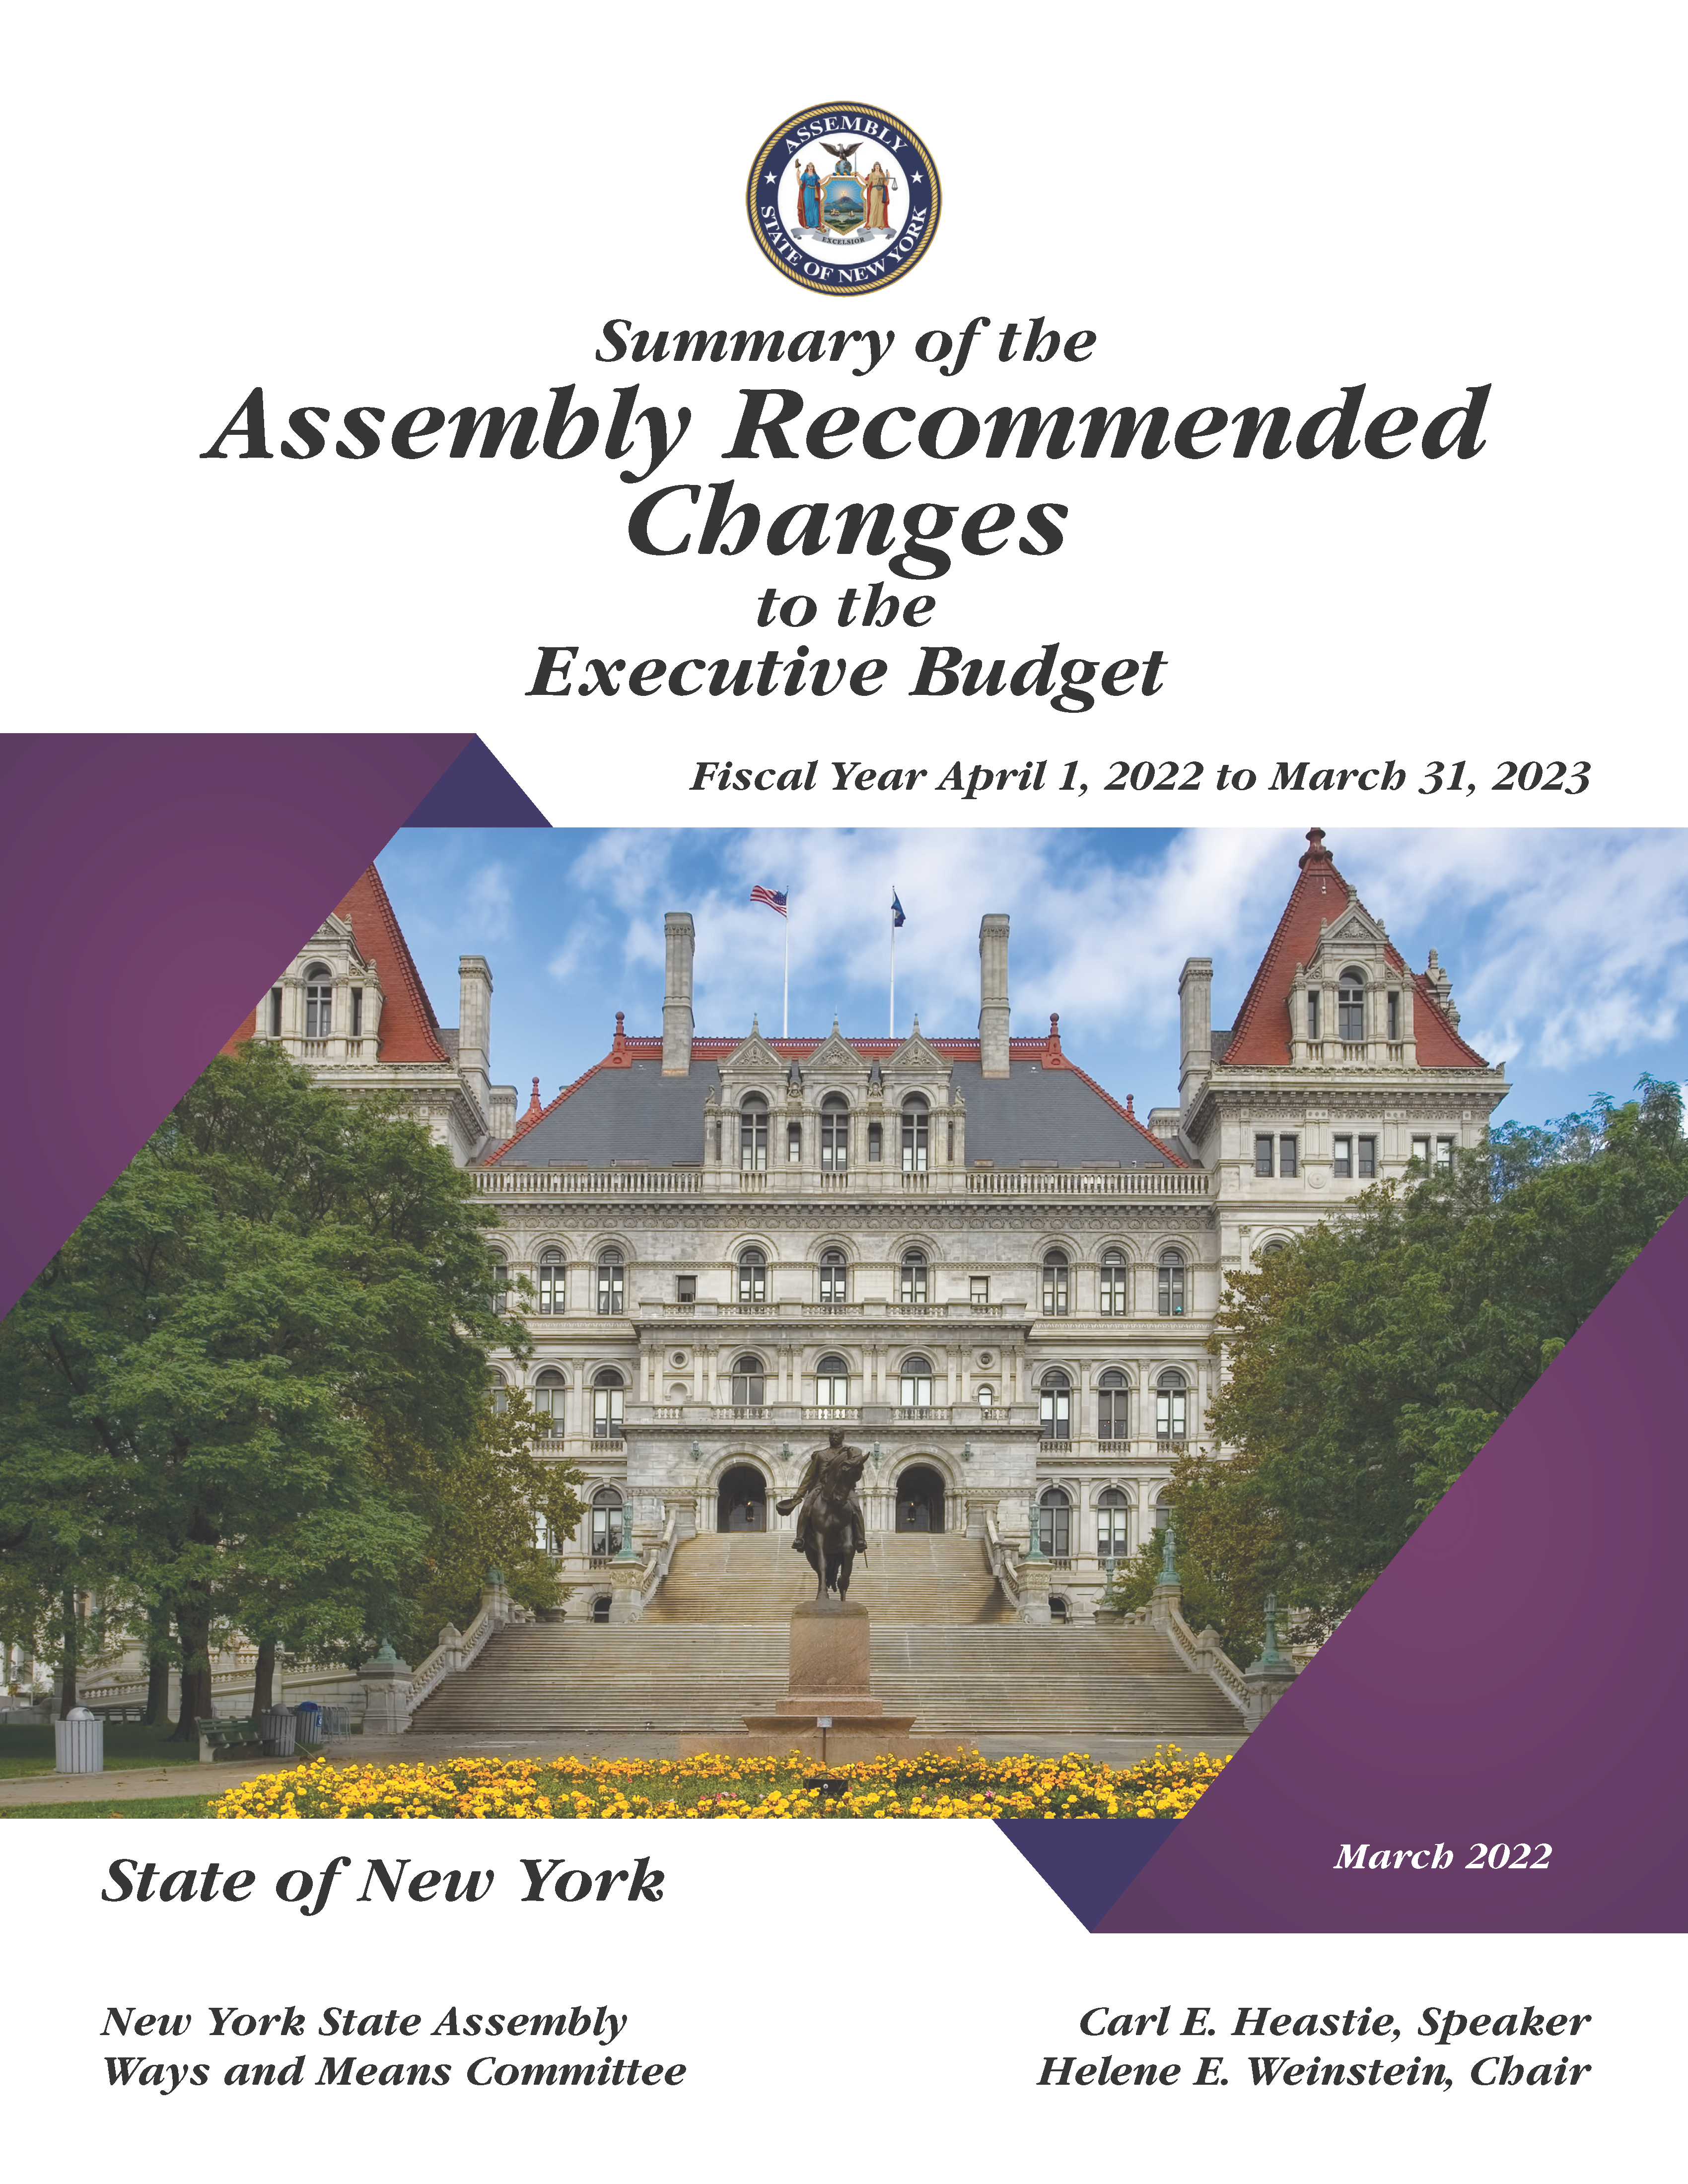 Summary of the Assembly Recommended Changes to the Executive Budget